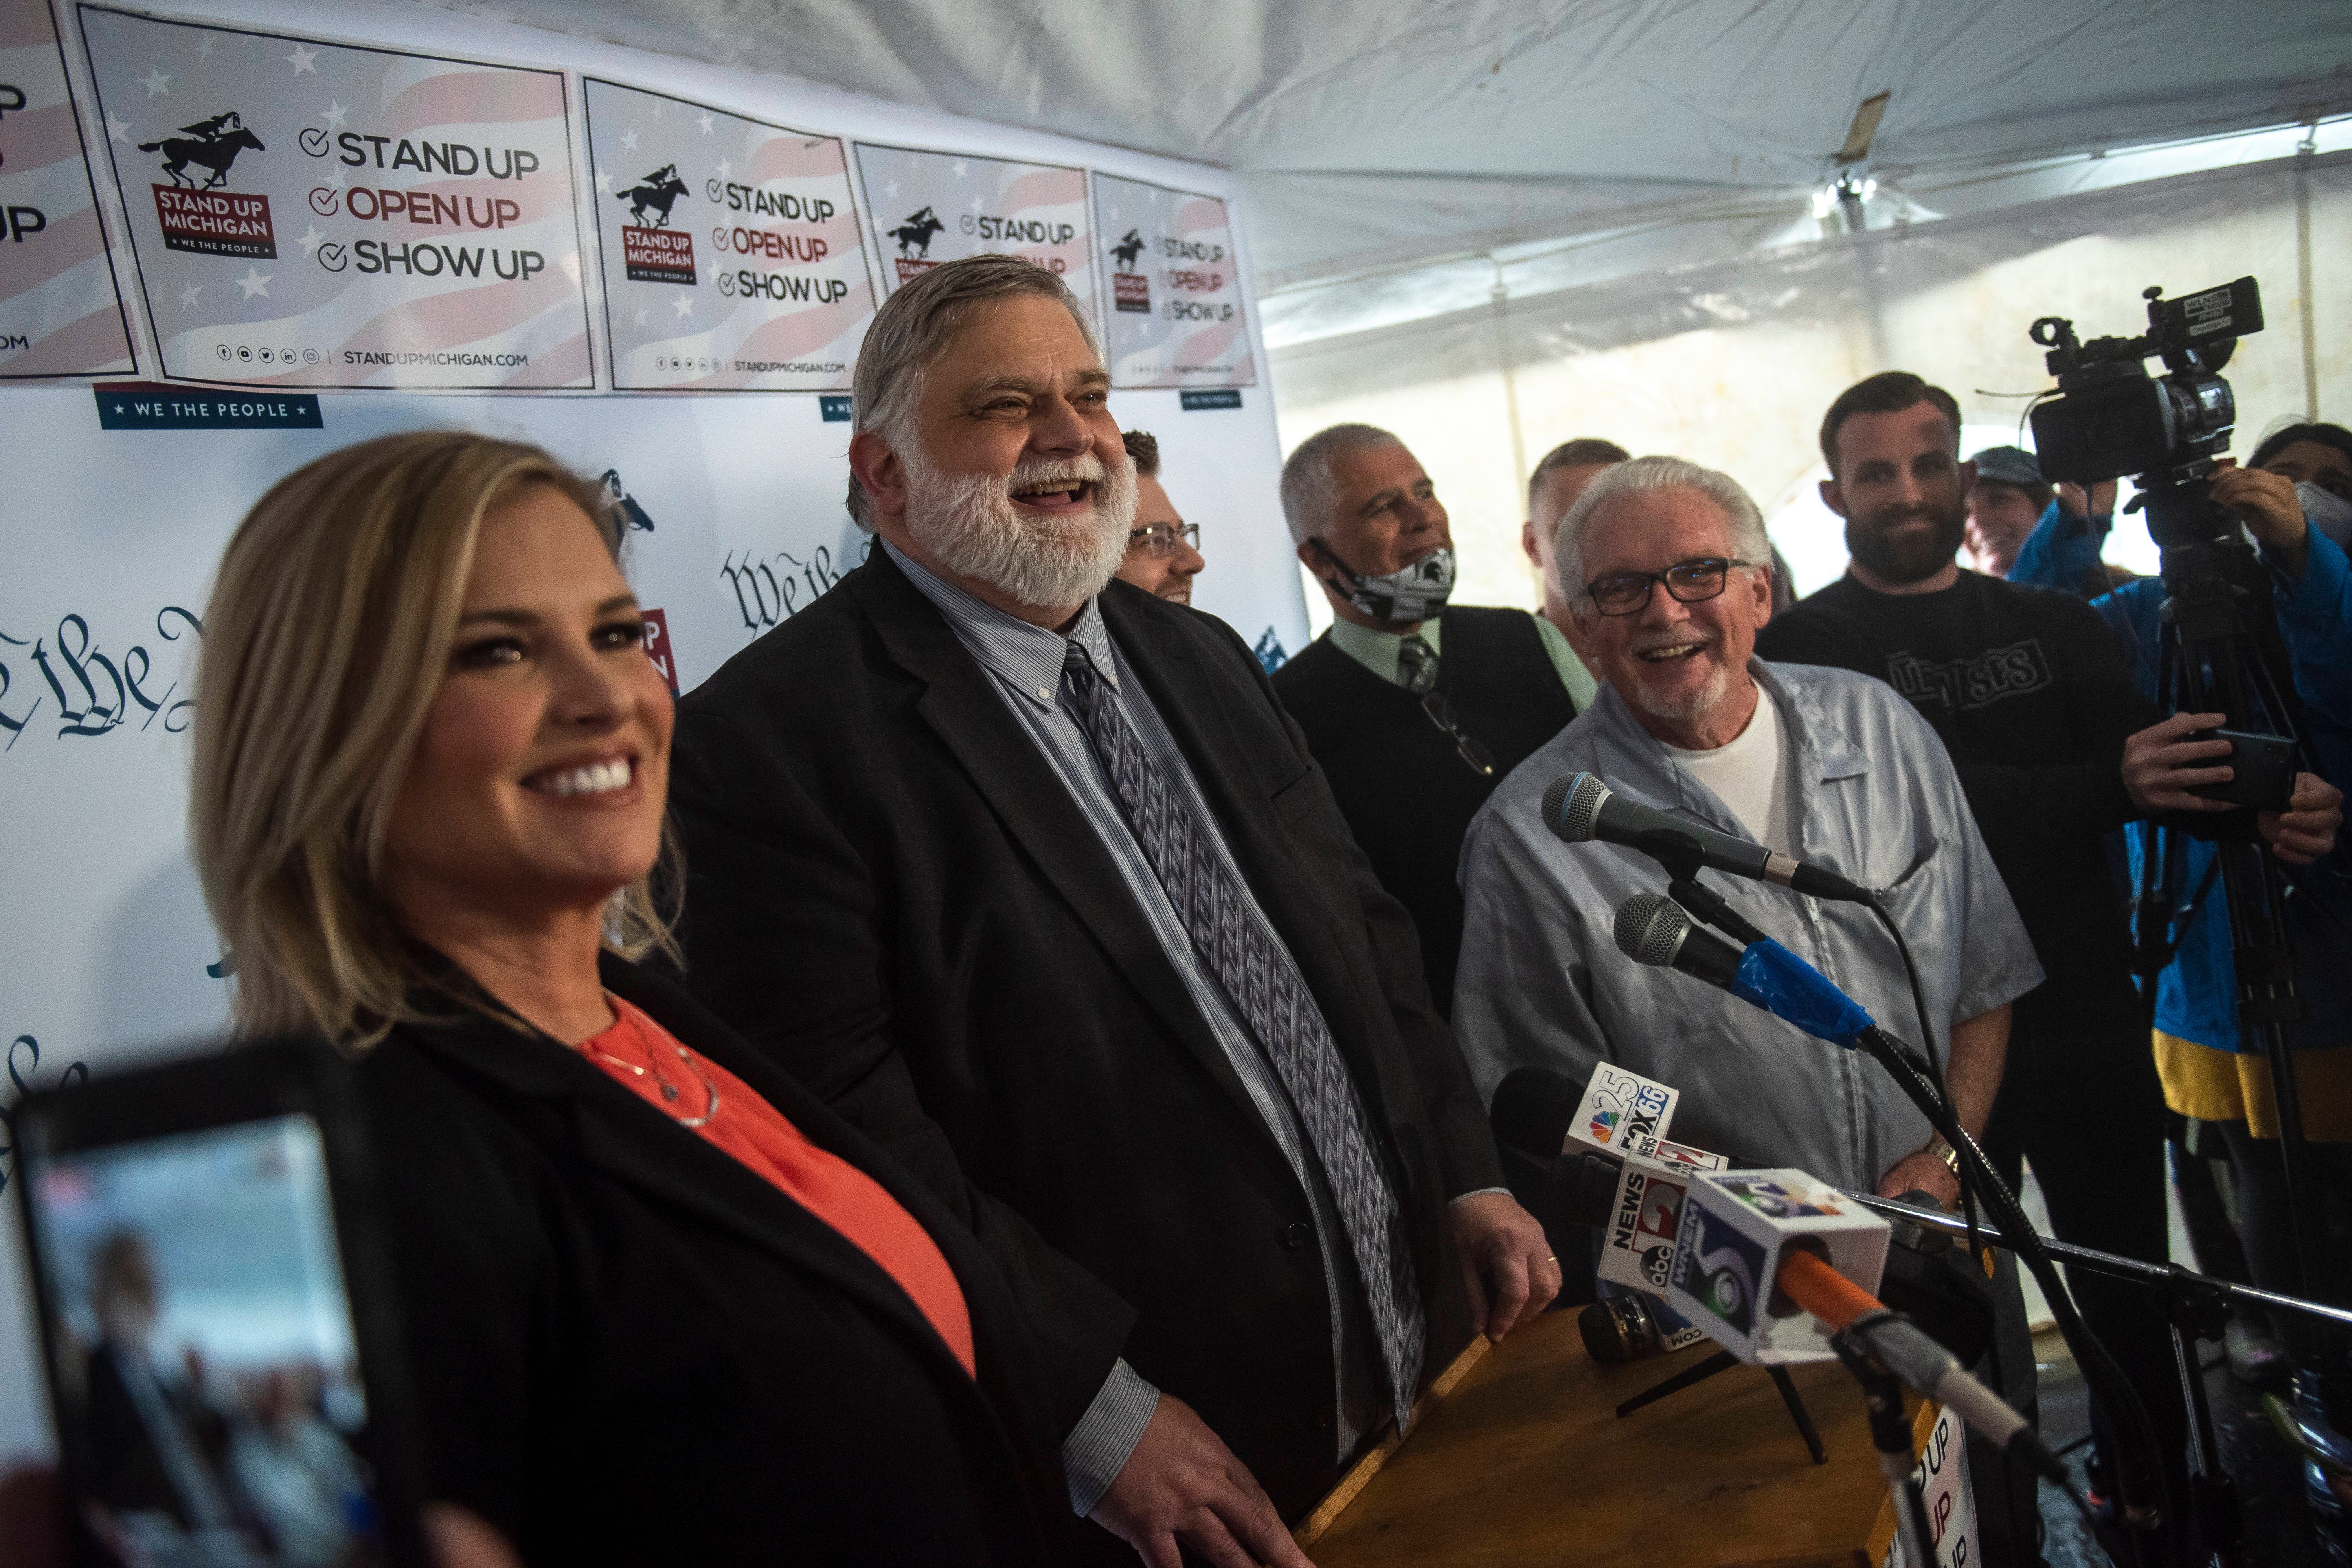 From left, North Dallas, Texas salon owner Shelley Luther, attorney David Kallman and barber Karl Manke smile at the press conference outside Karl's barbershop in Owosso.